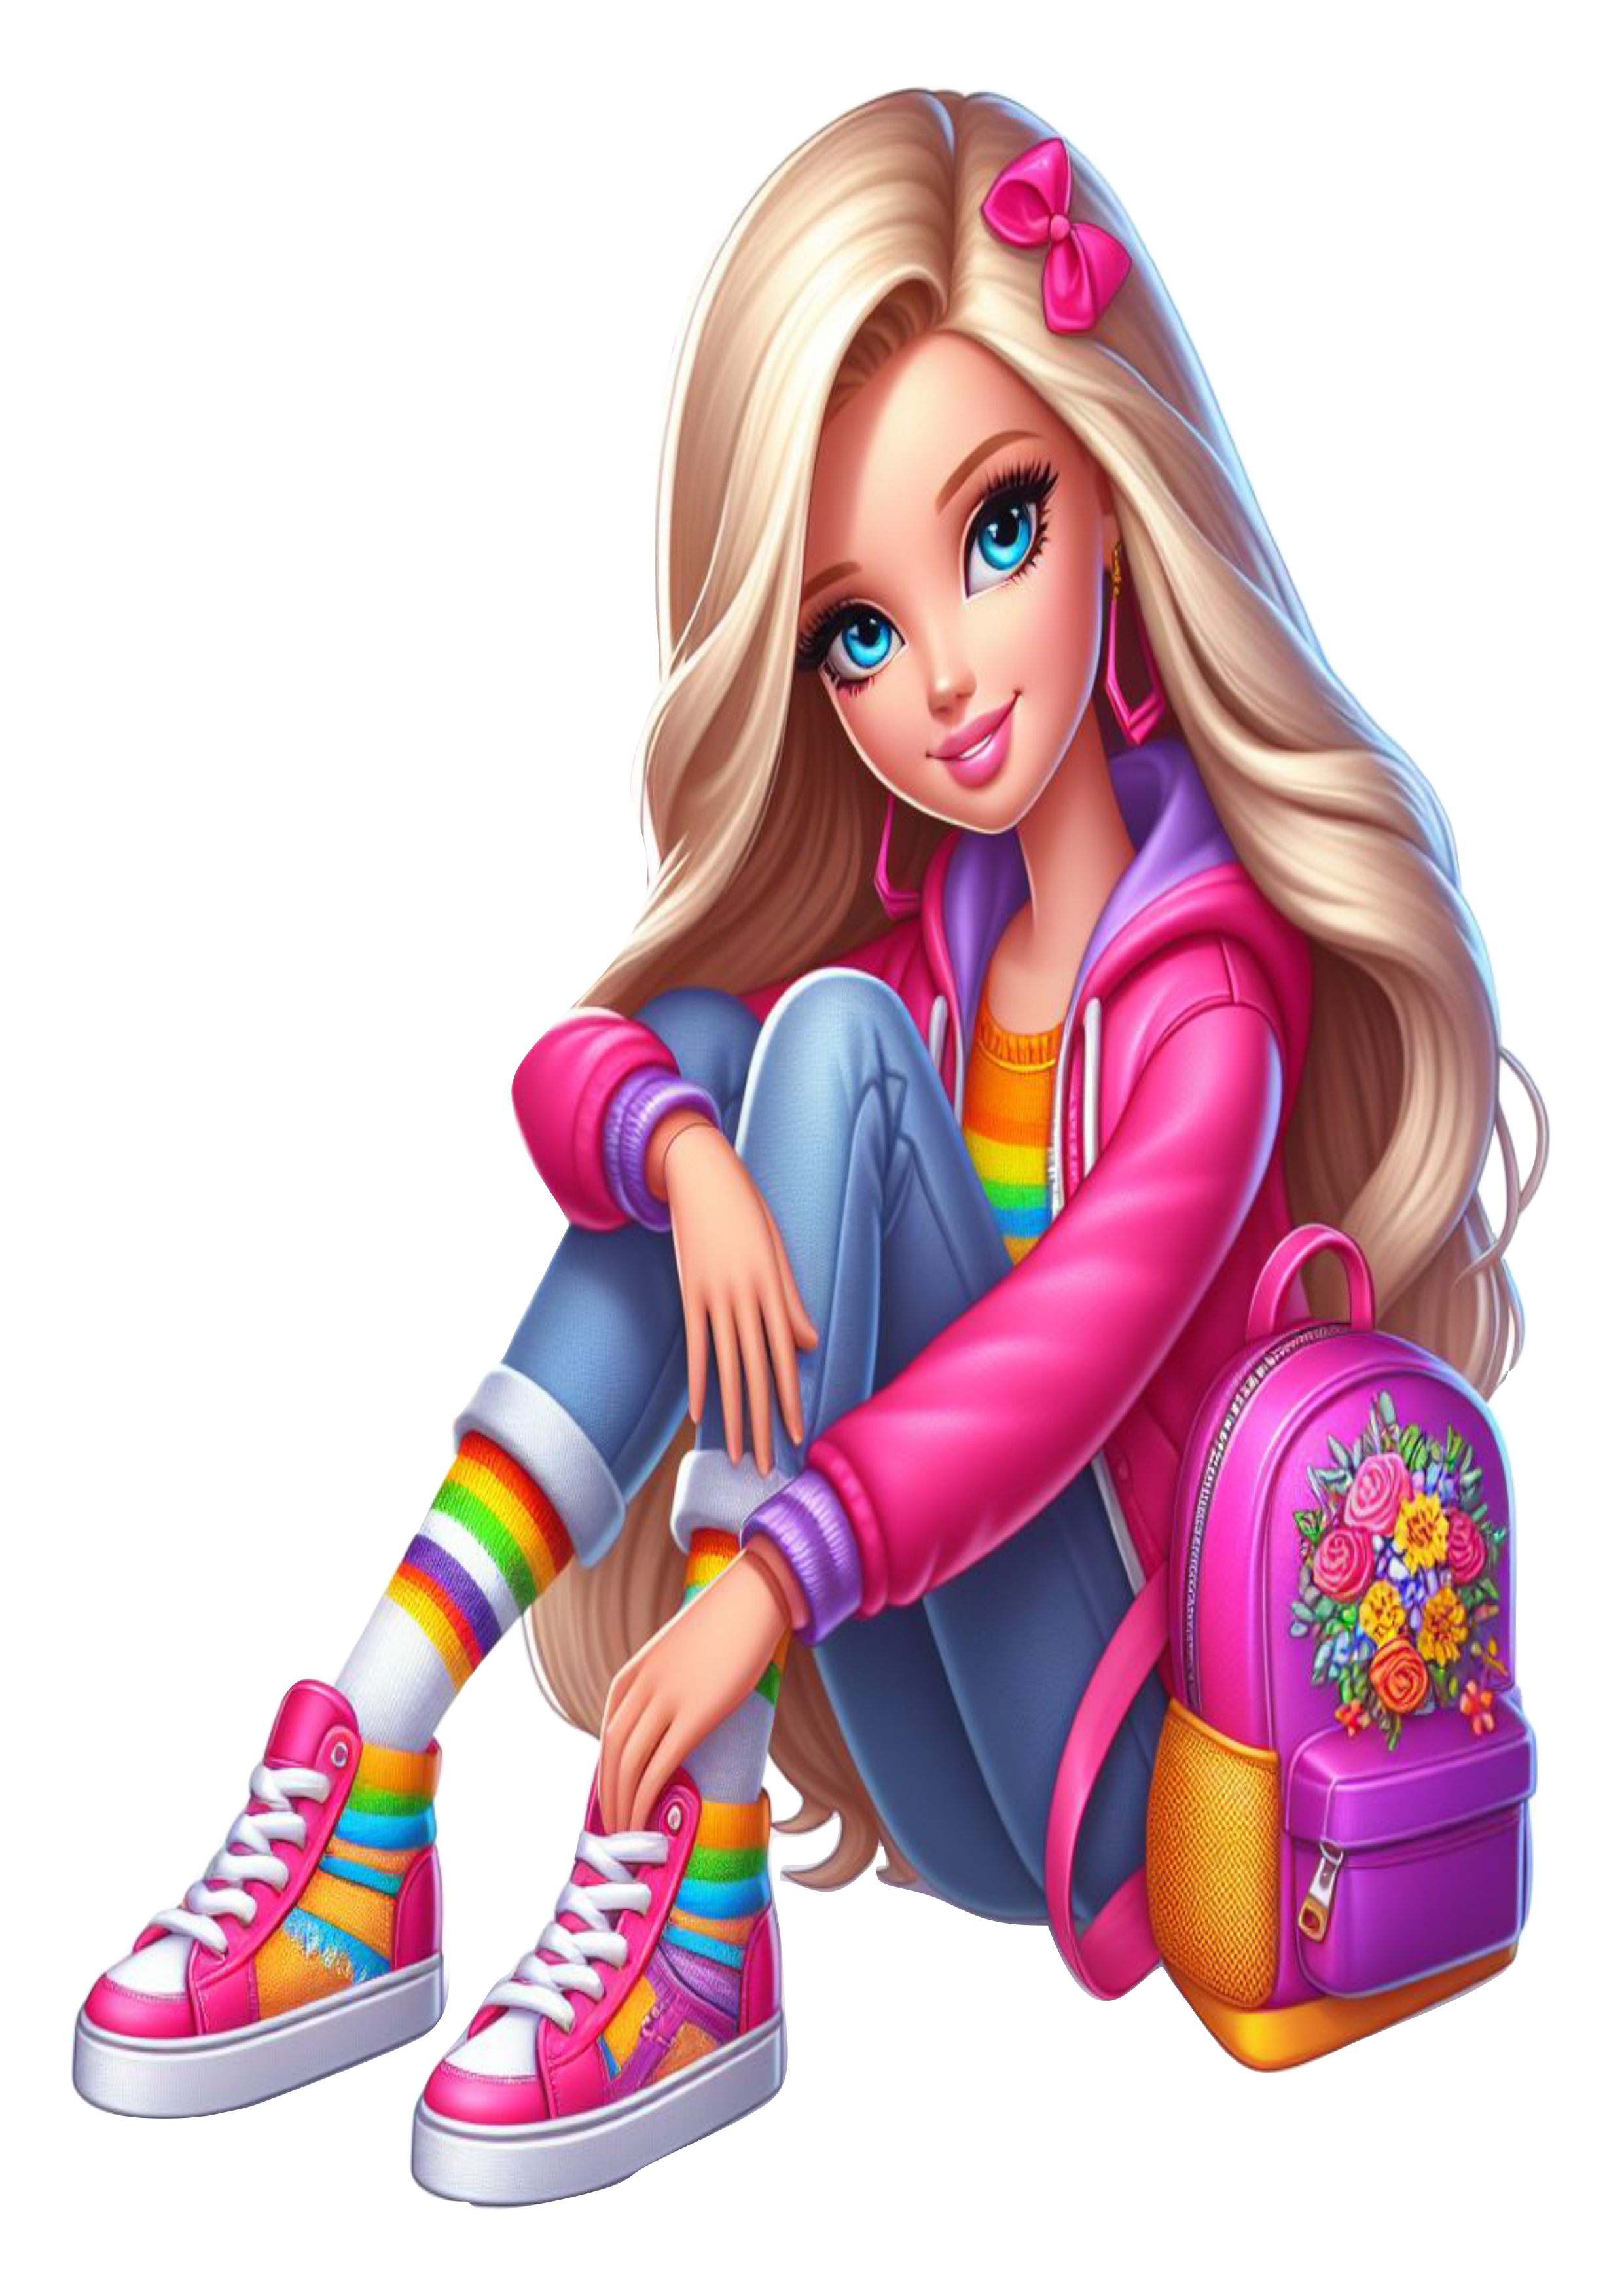 High School Barbie Doll png images free download clipart